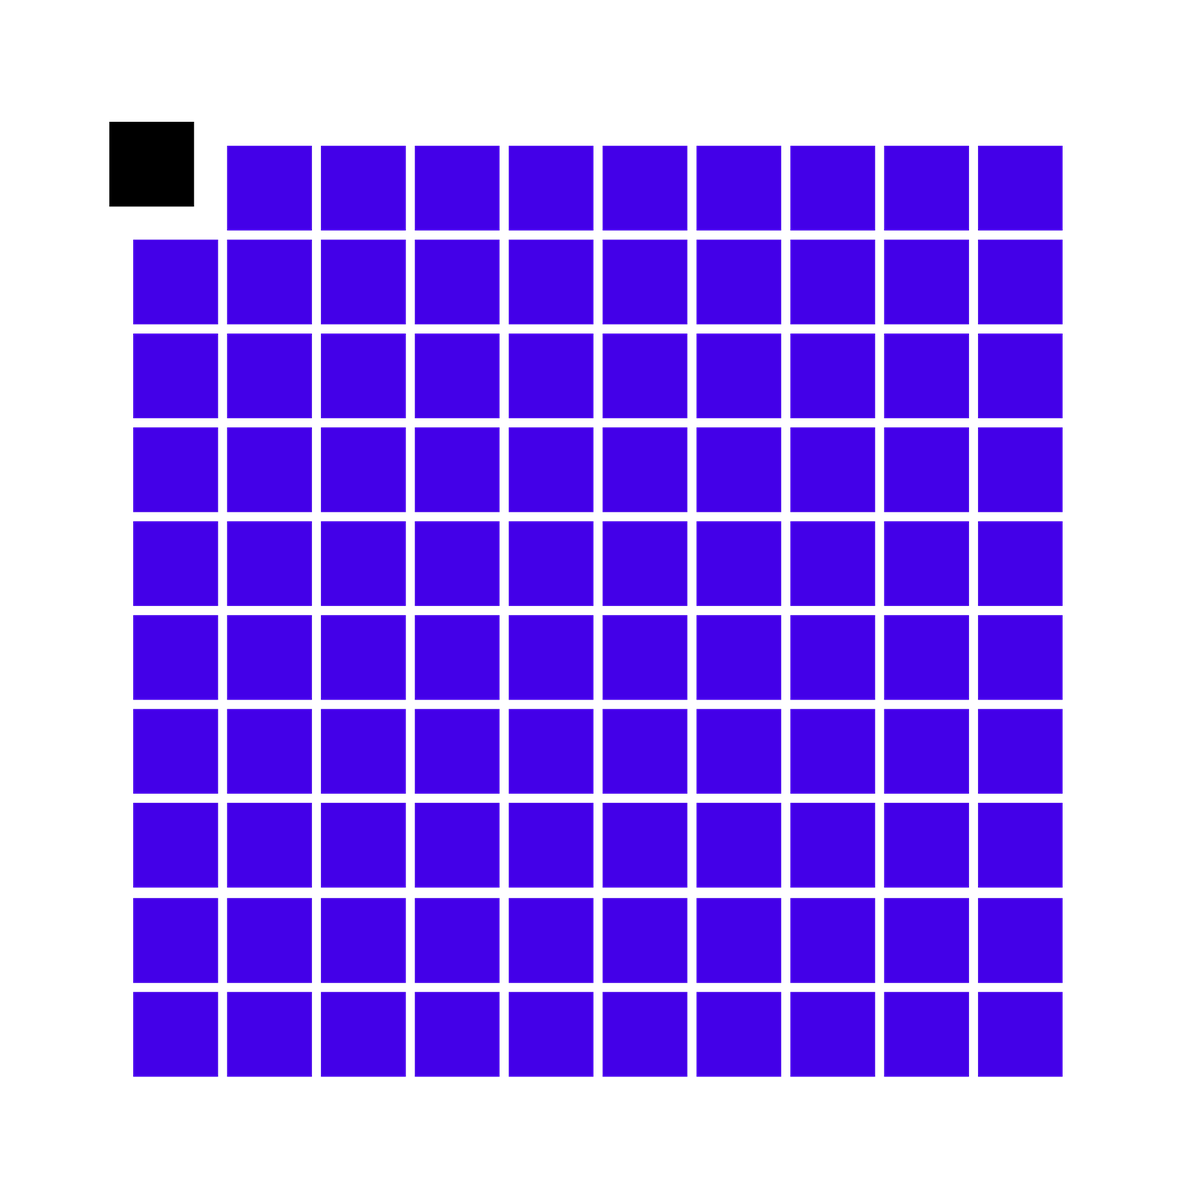 One black square representing 0.01 million metric tons of CO2 sits alongside 99 blue squares. Altogether, the black and blue square represent 1 million metric tons of captured CO2.